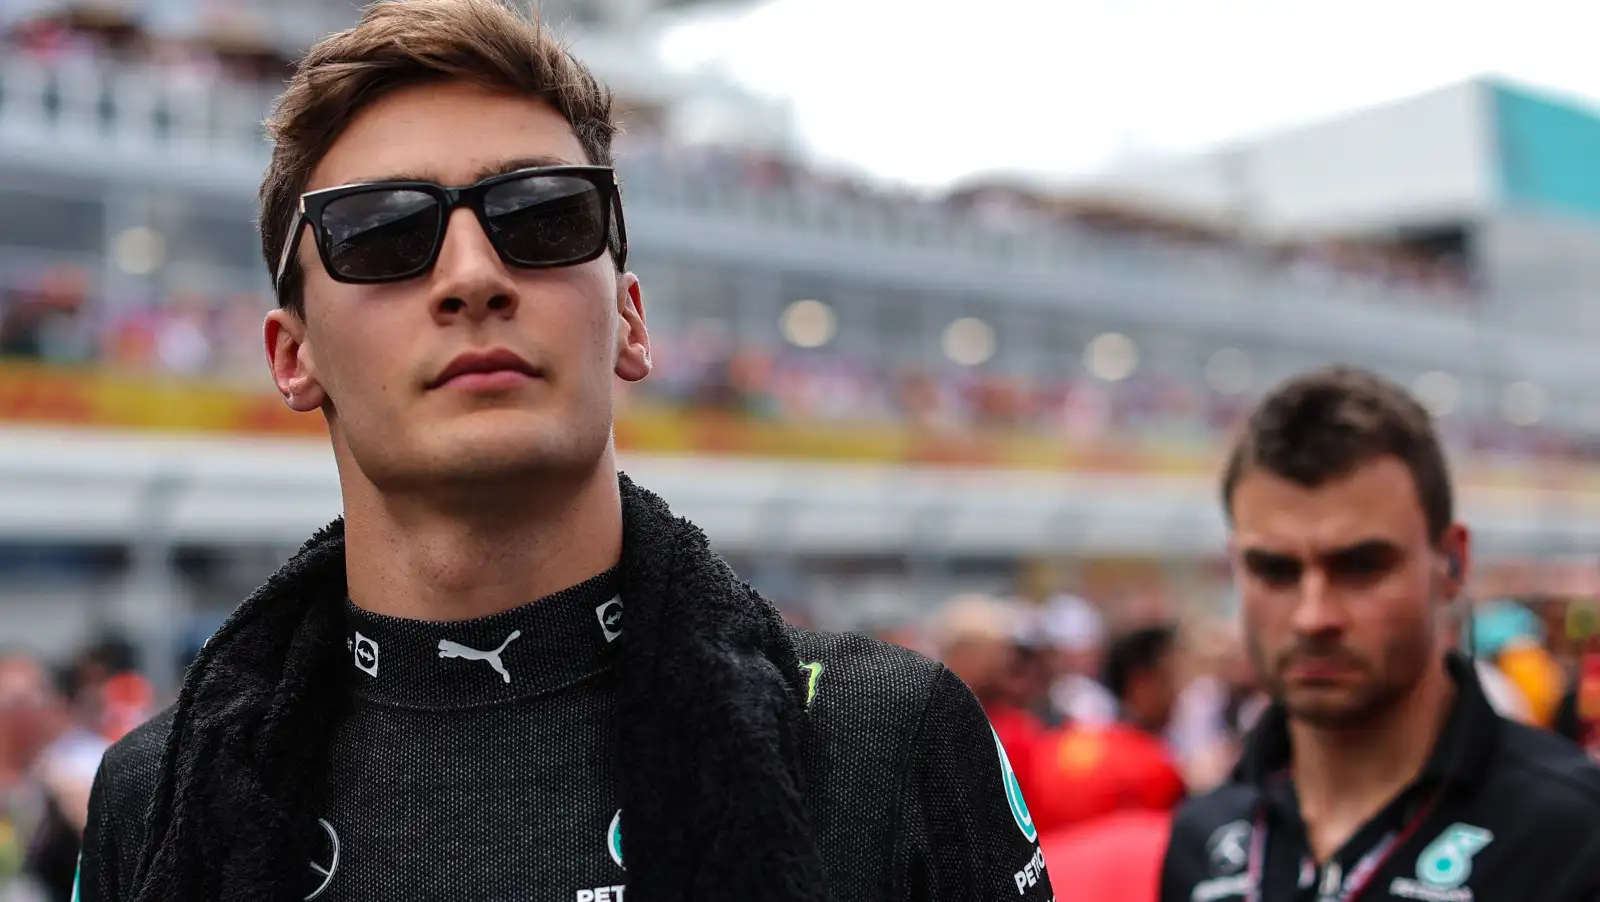 George Russell wearing sunglasses on the grid, Mercedes man behind him. Miami May 2022